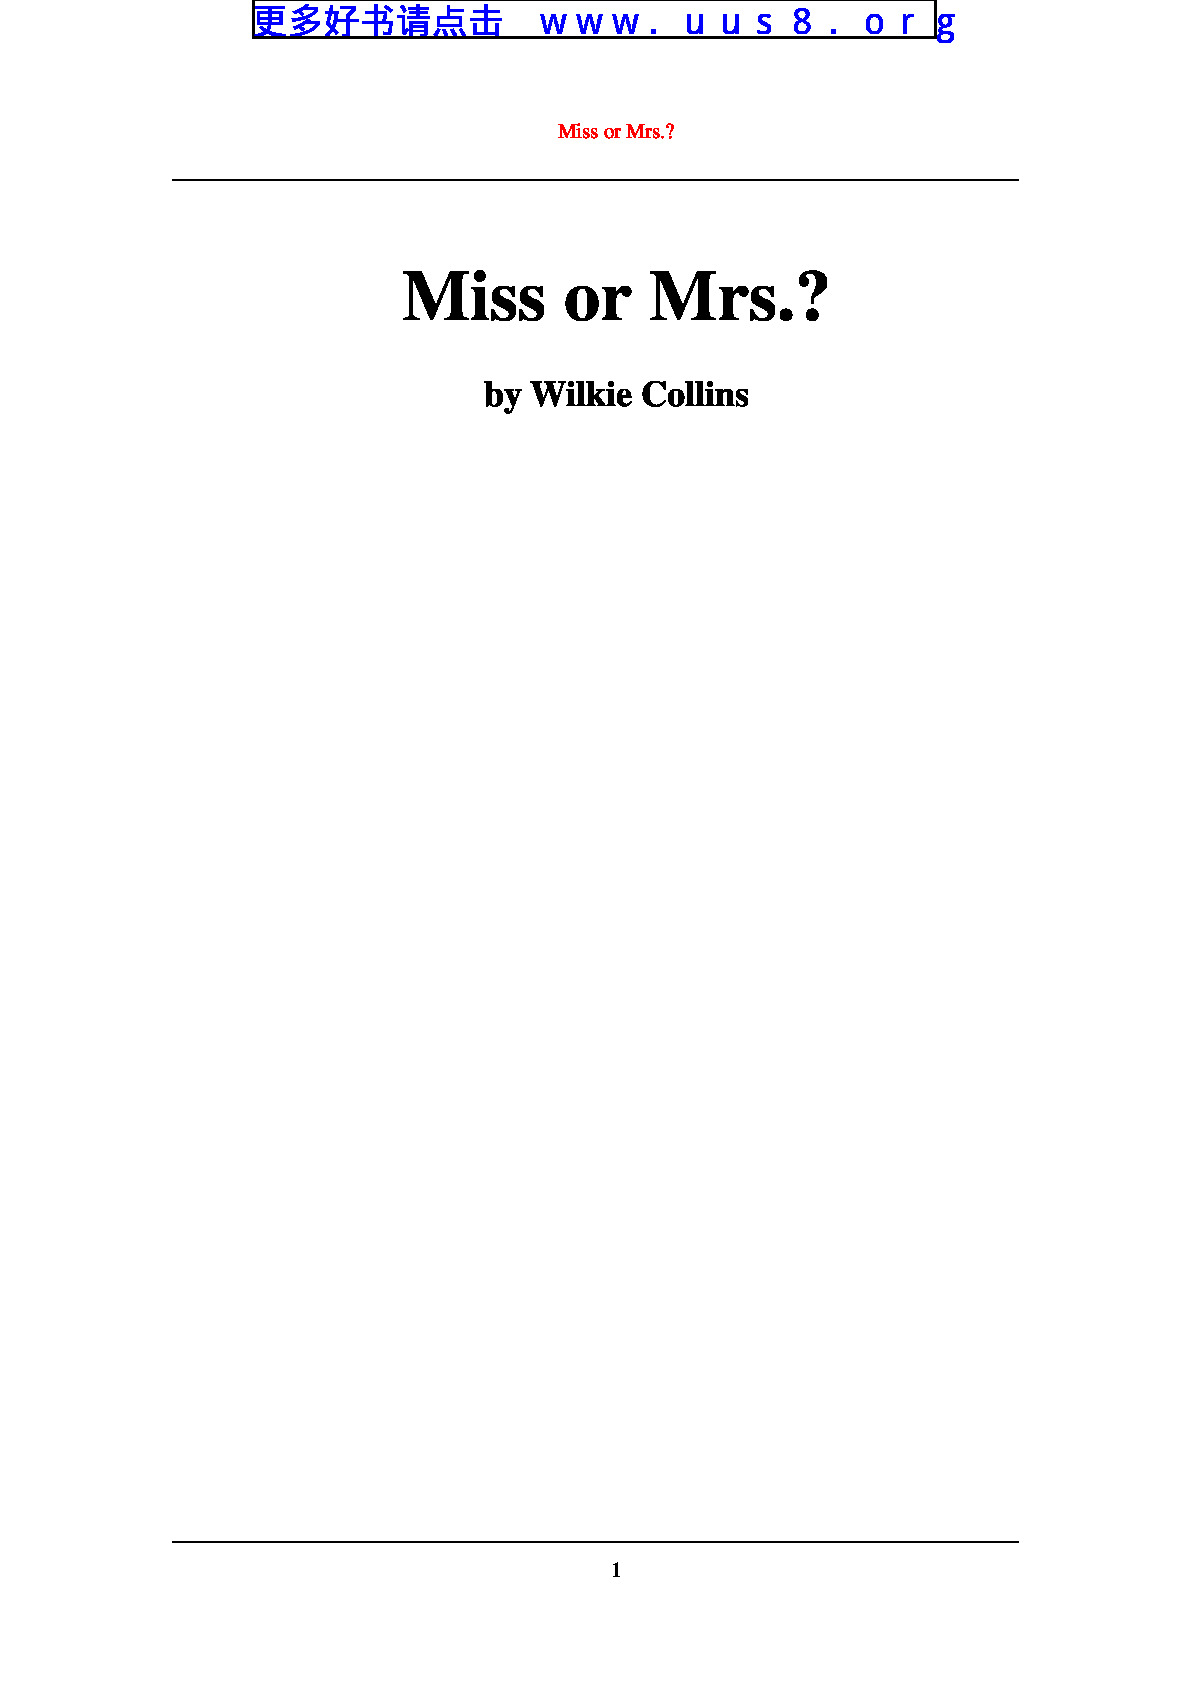 Miss_or_Mrs